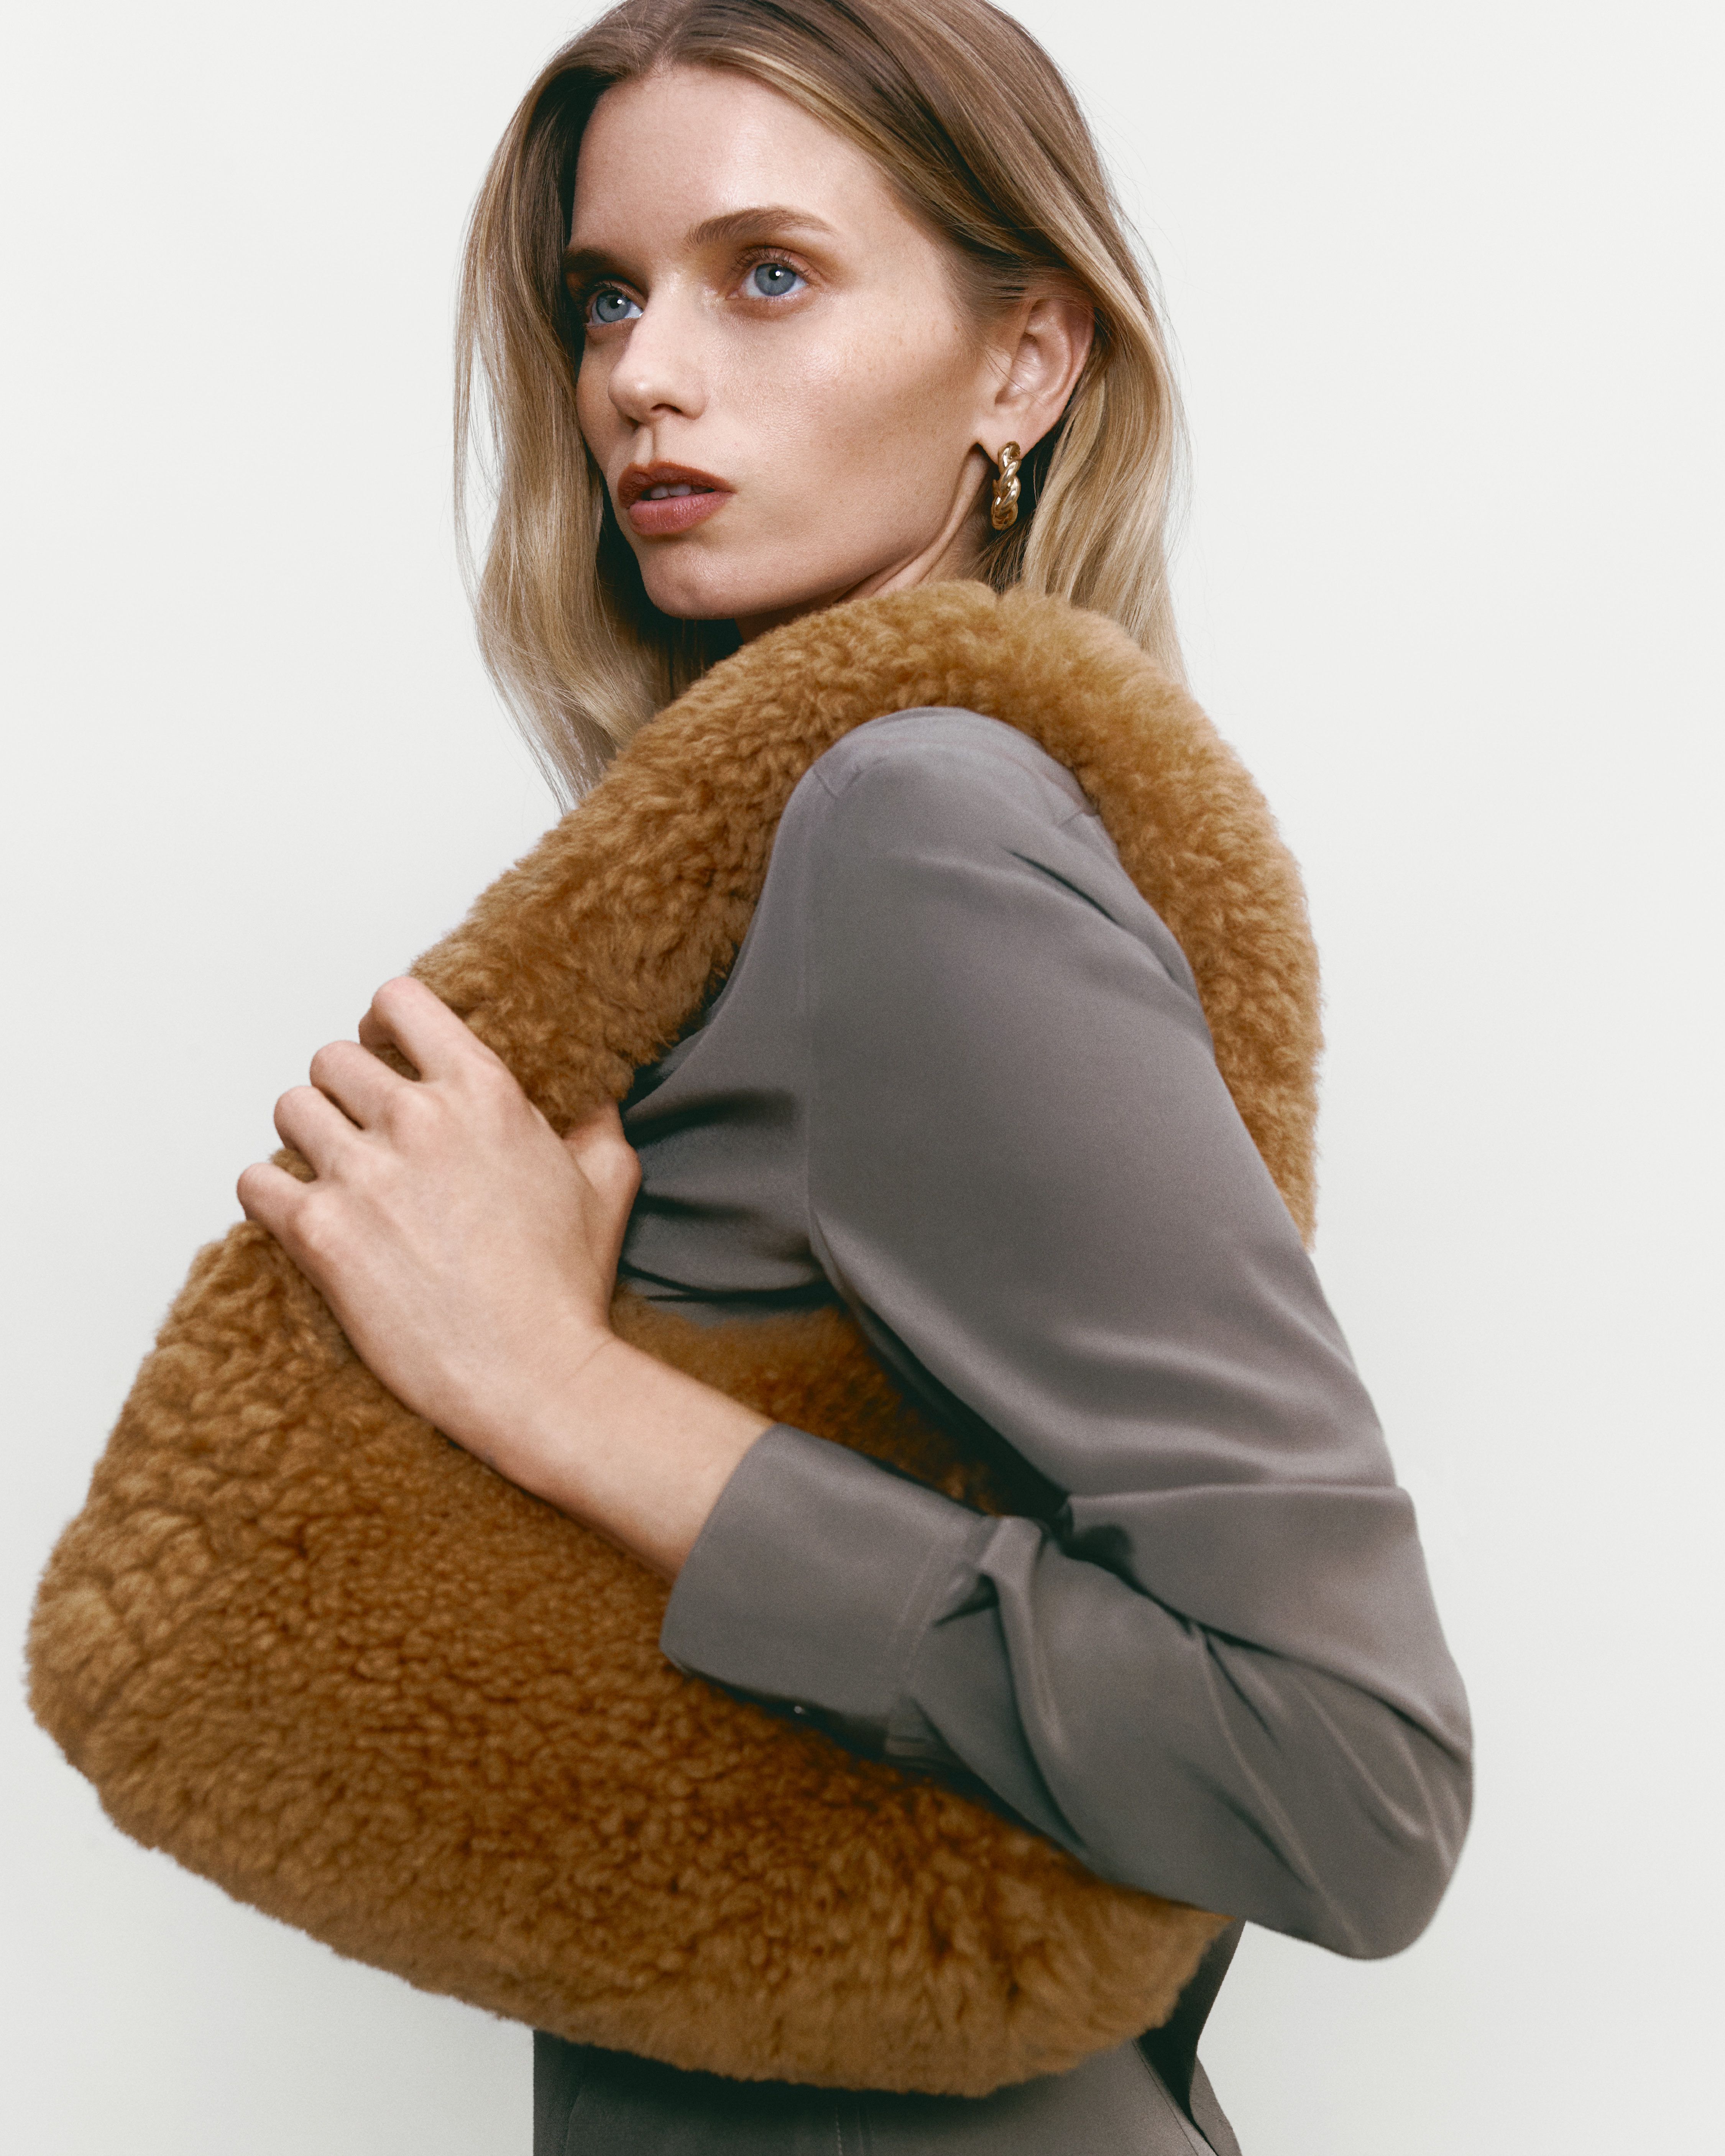 Abbey Lee facing the side wearing a taupe silk shirt with tan shearling bag on her shoulder